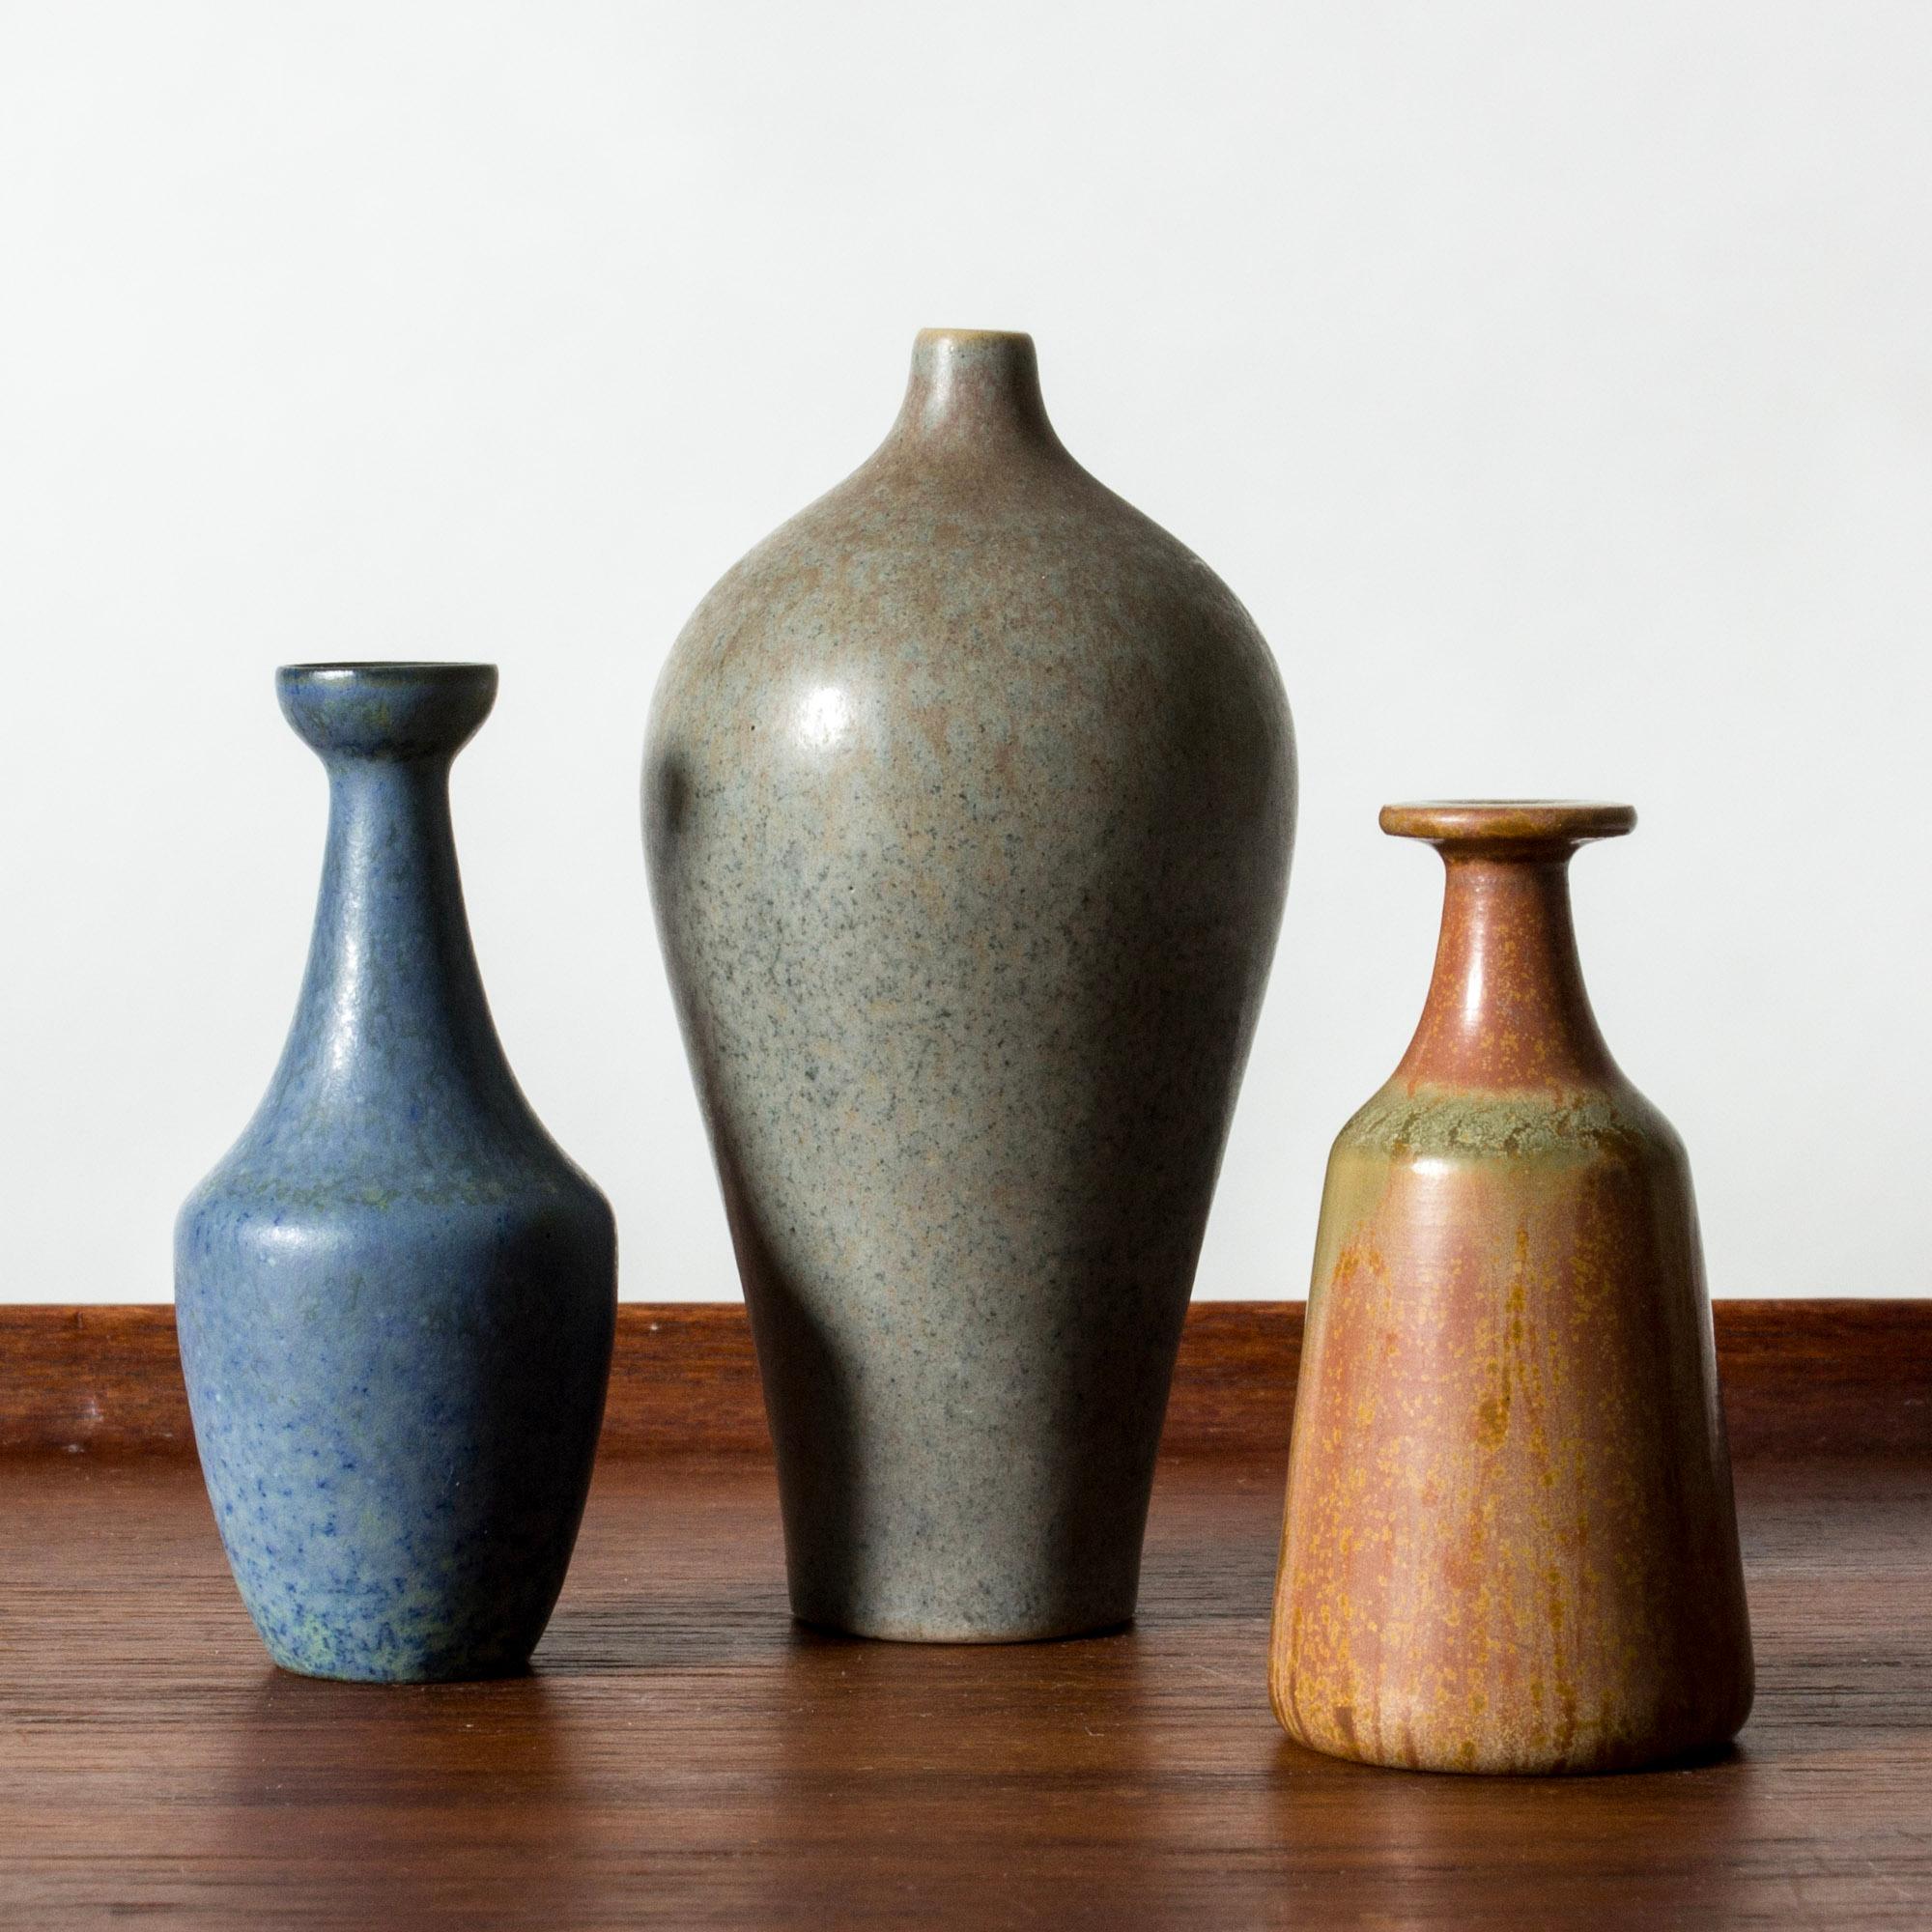 Set of three miniature stoneware vases by Gunnar Nylund, in imaginative forms with rounded lines. Lovely glazes in nuances of terracotta, blue and steel grey.

Height 6/6.7/9 cm, Diameter 3-4.5 cm.

Gunnar Nylund was one of the most influential